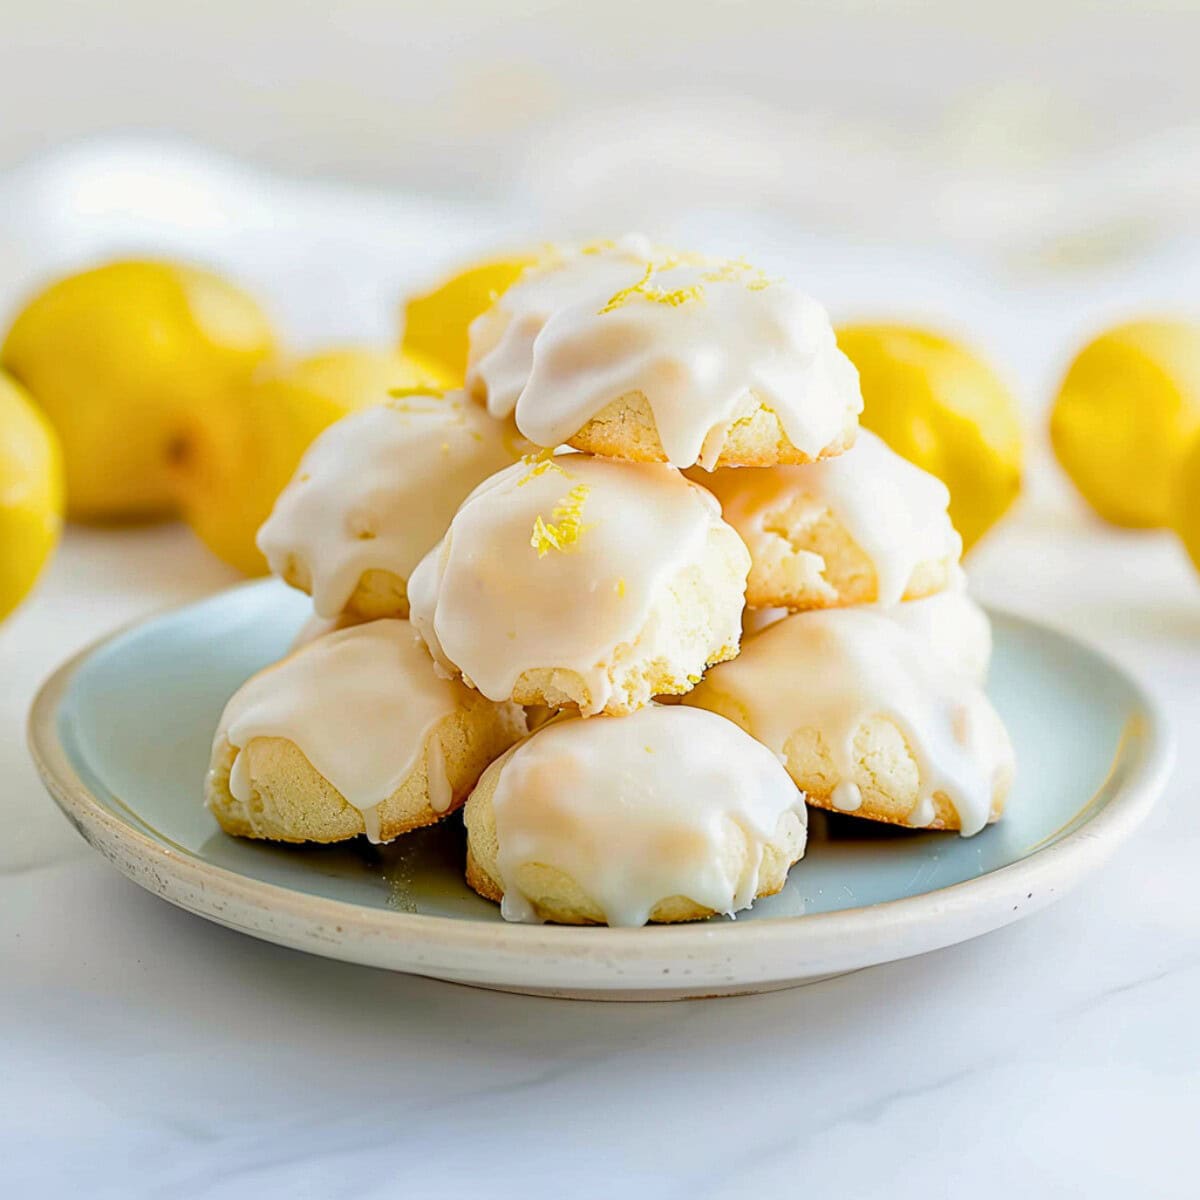 Pile of Lemon Drop Cookies with Lemon Icing on a Plate with Fresh Lemons in the Background